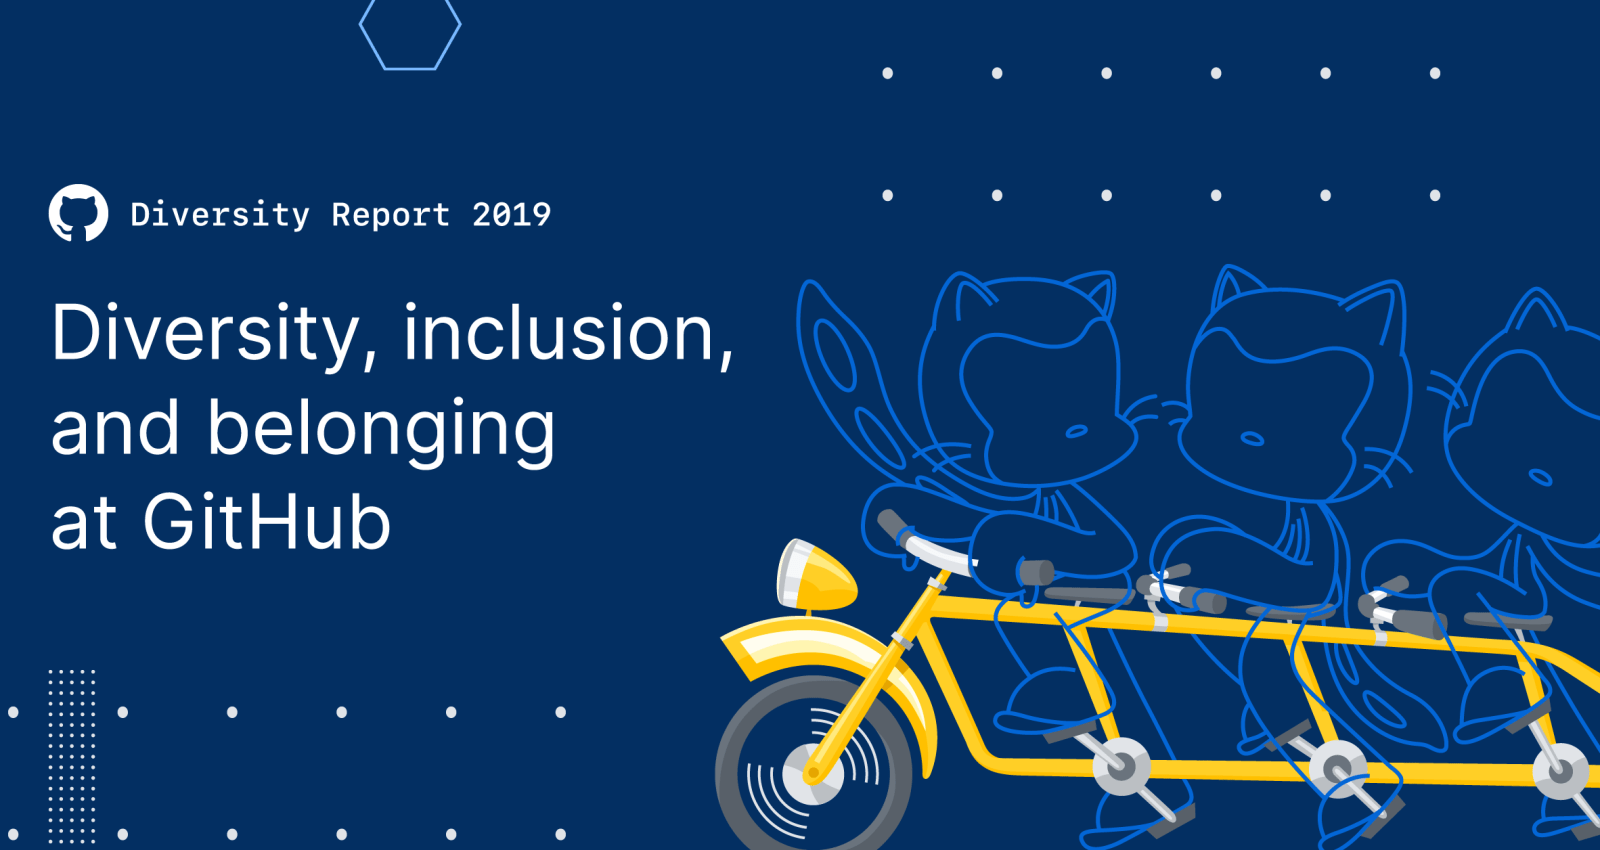 Diversity, inclusion, and belonging at GitHub in 2019